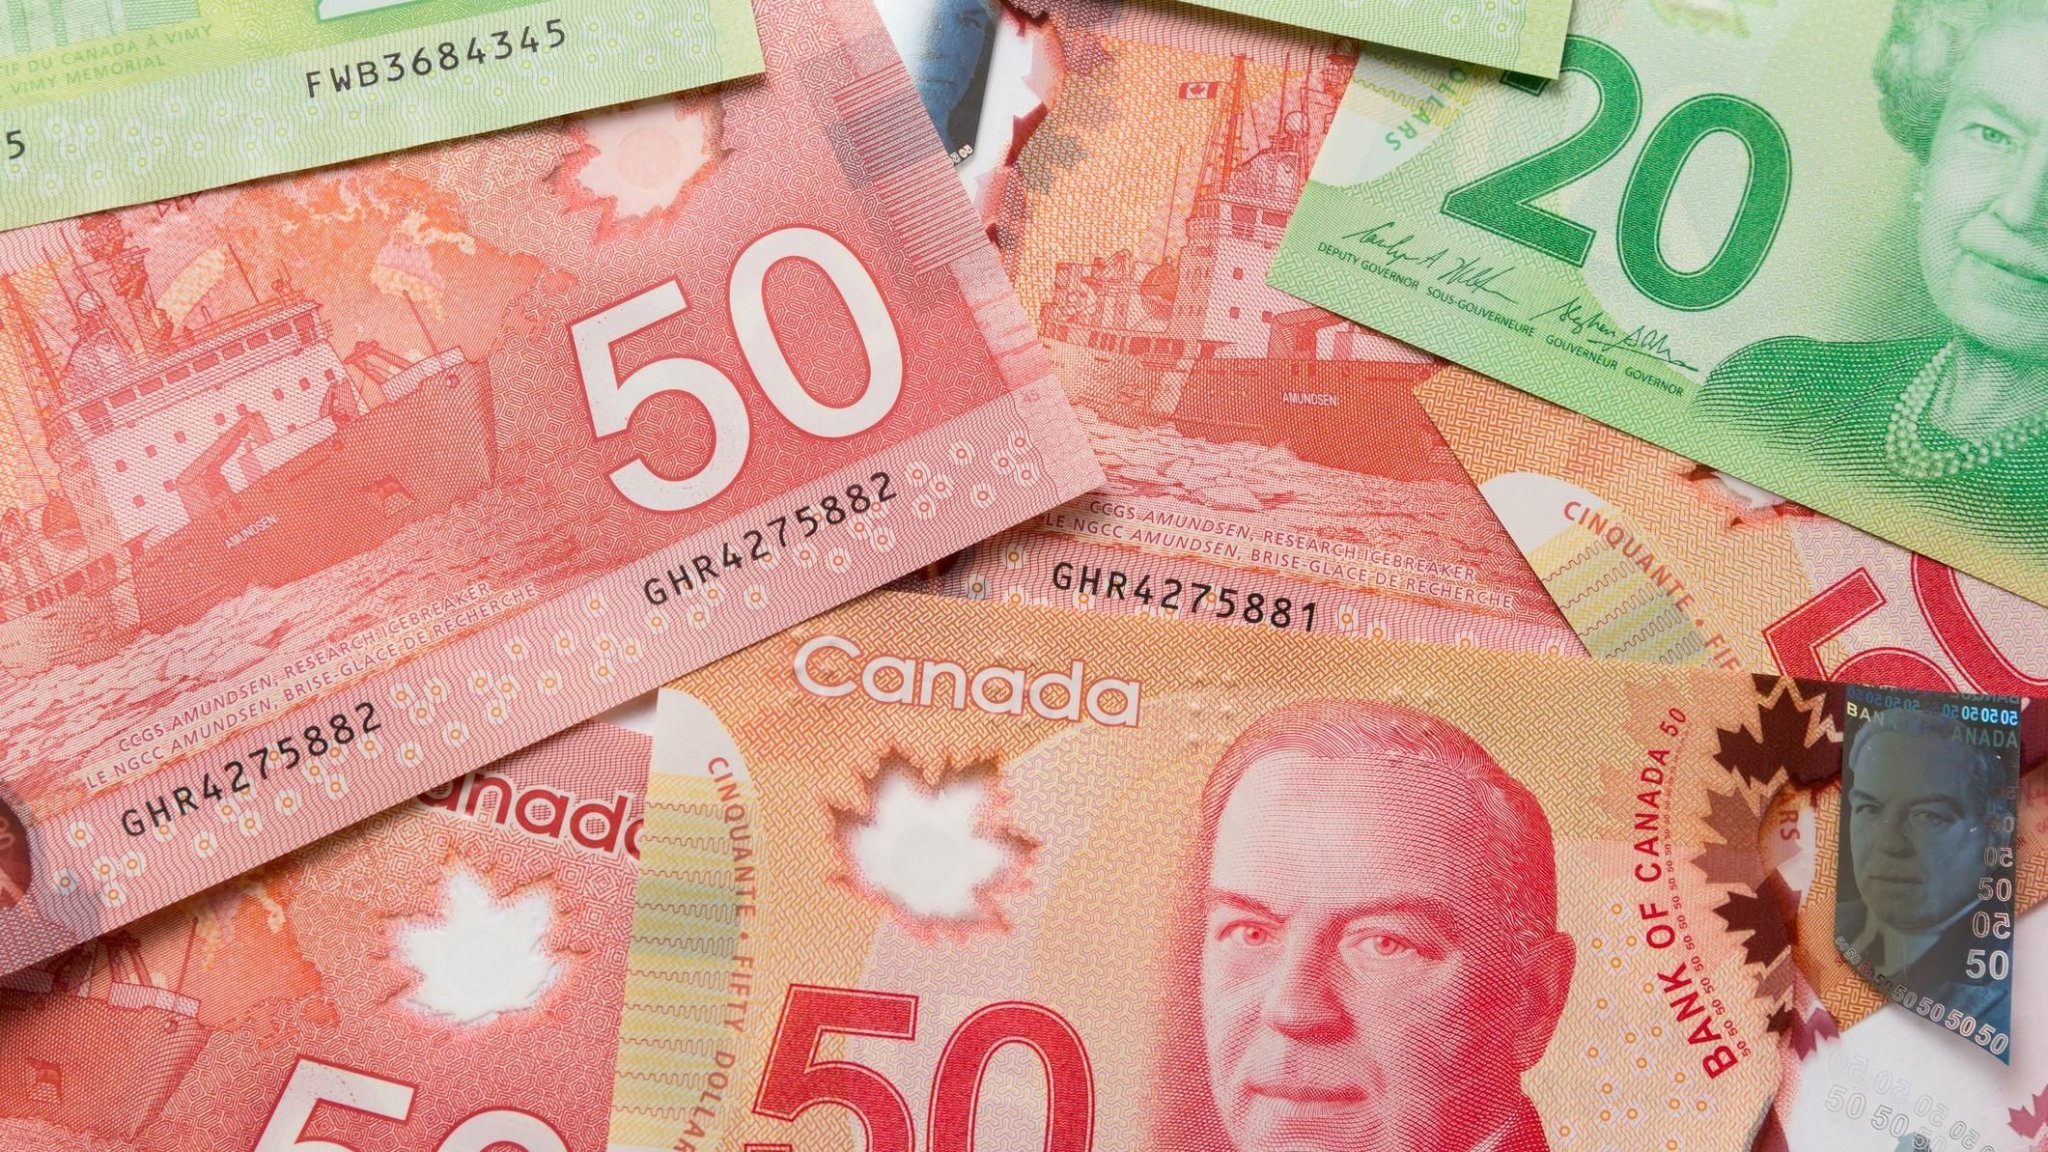 Ontario's Minimum Wage Just Increased But It's Not The Highest Pay In Canada